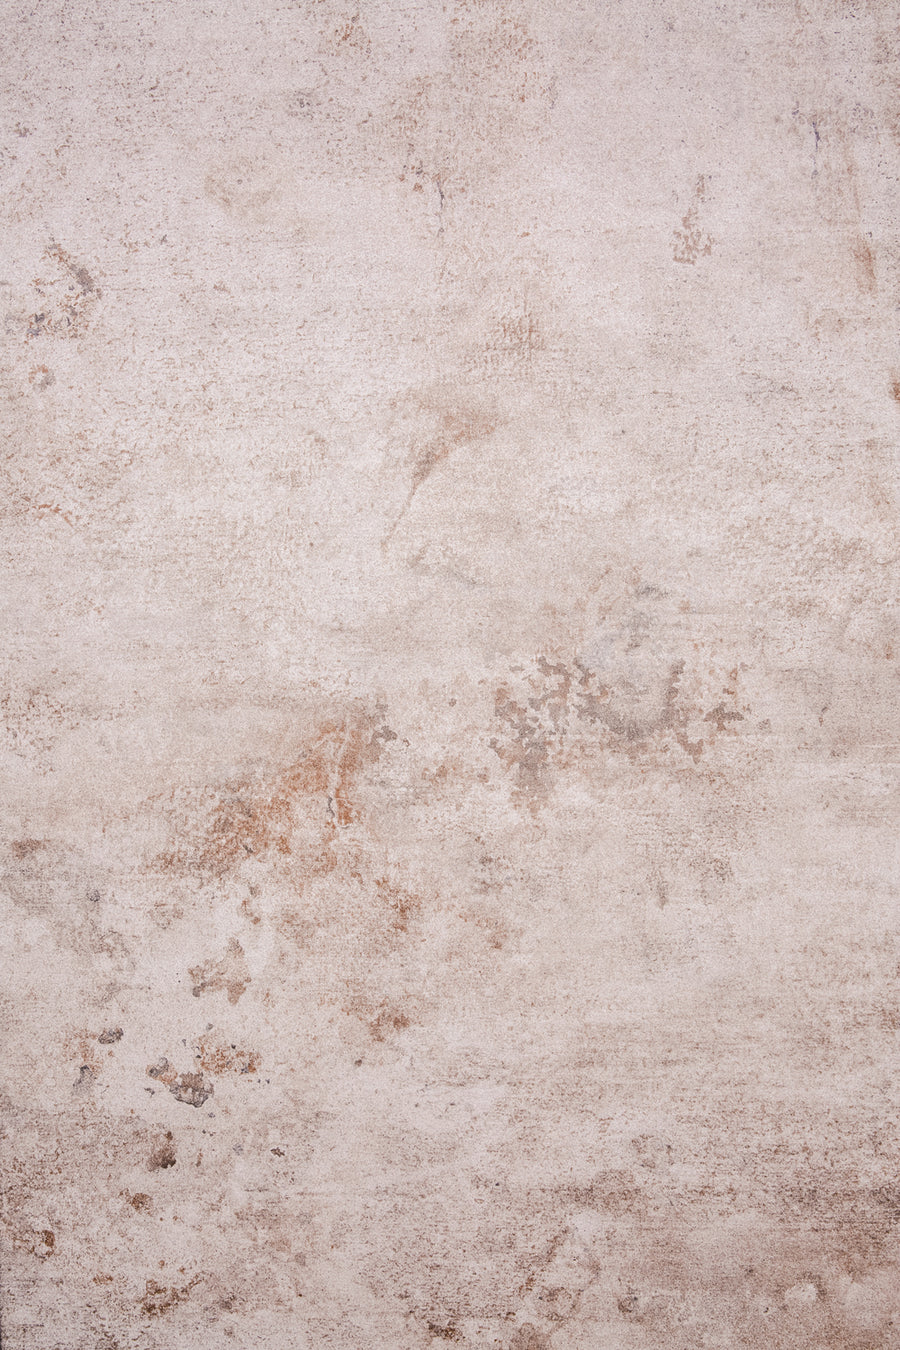 Warm-toned rustic stone photography surface